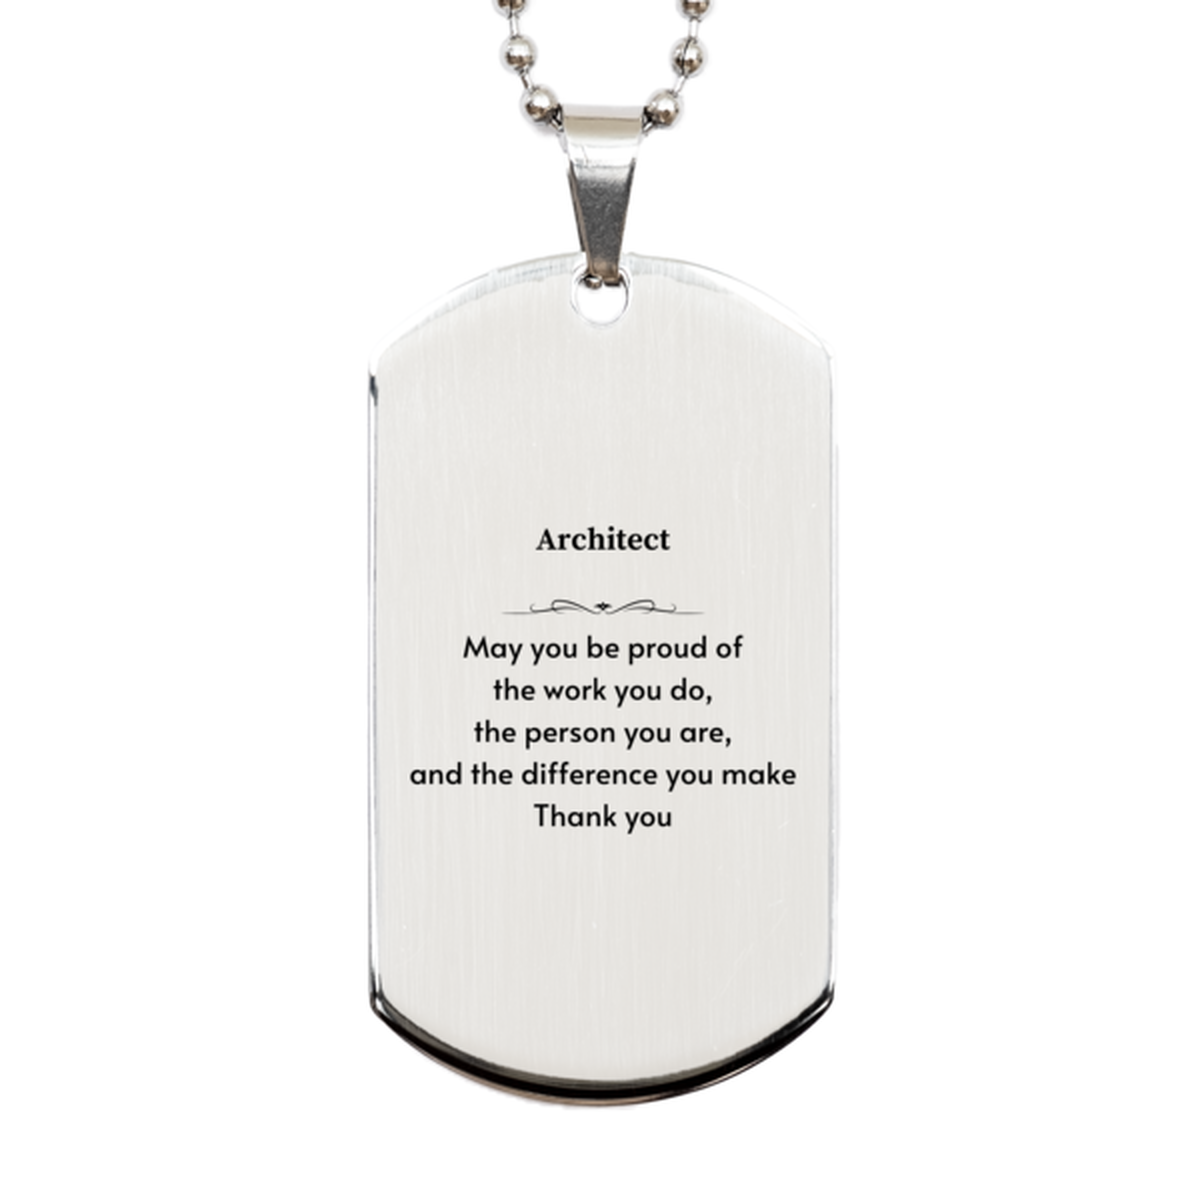 Heartwarming Silver Dog Tag Retirement Coworkers Gifts for Architect, Architect May You be proud of the work you do, the person you are Gifts for Boss Men Women Friends